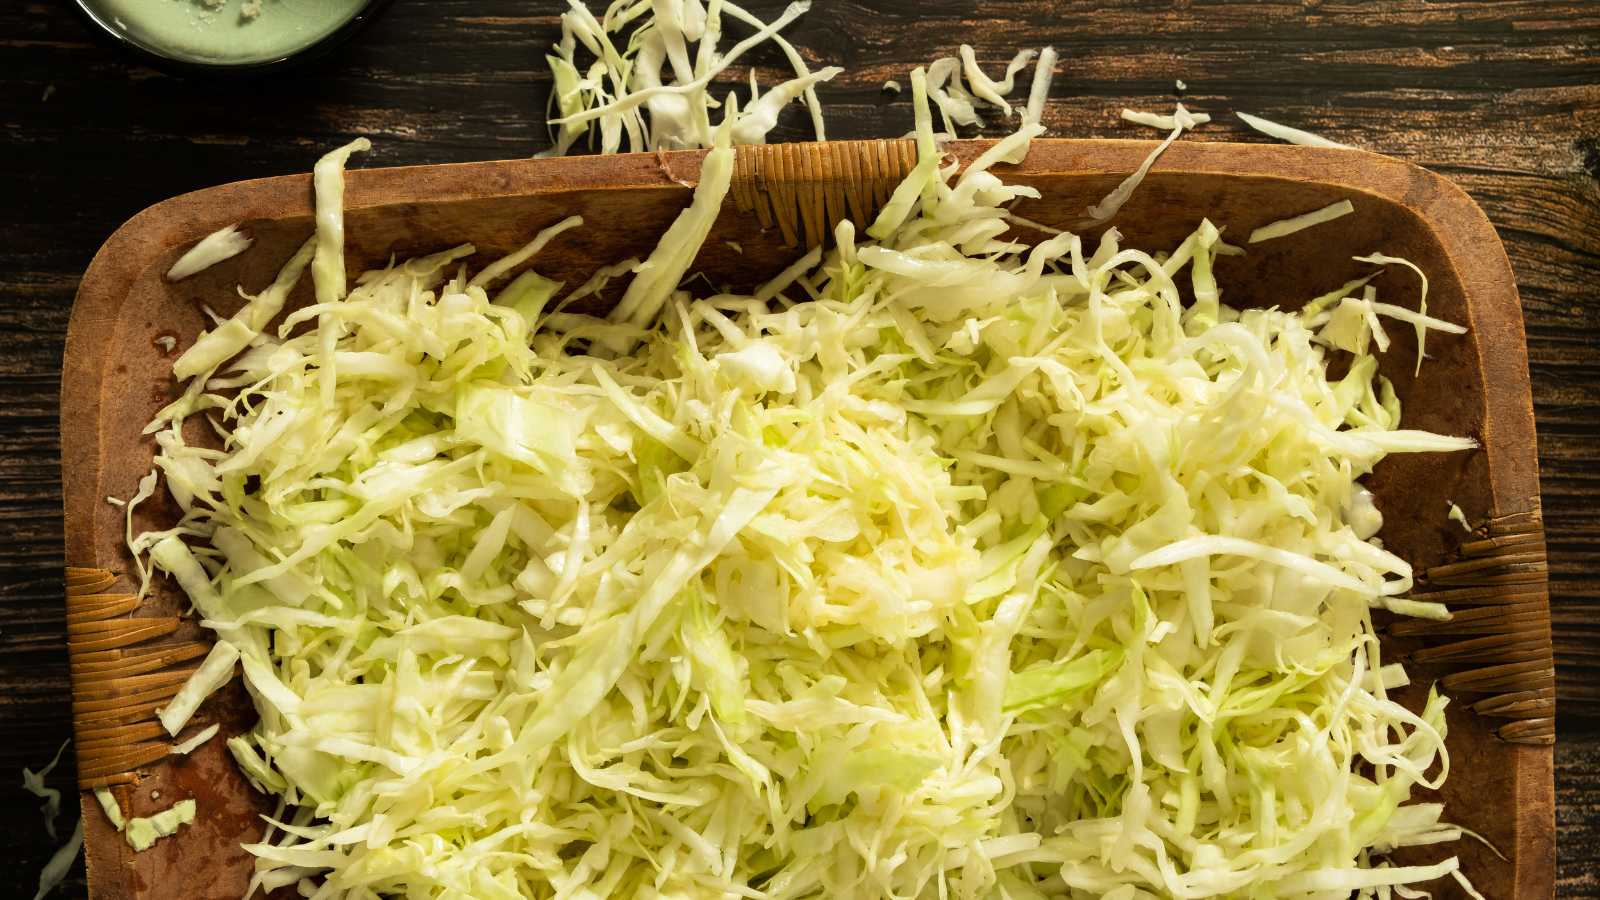 Shredded and salted green cabbage sitting in a wooden bowl.